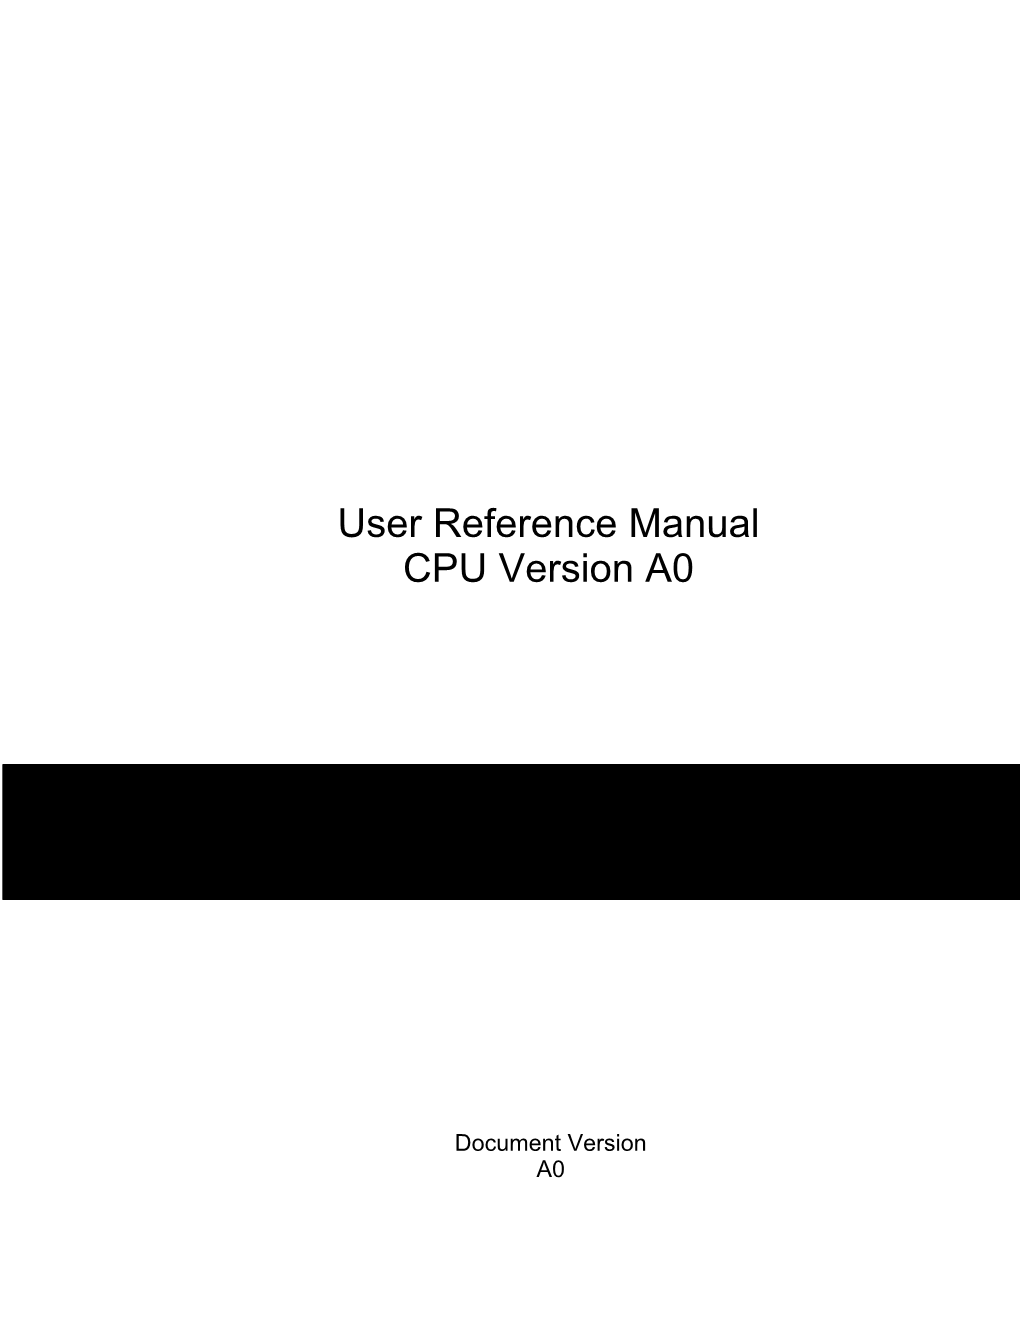 Half-Y User Reference Manual CPU Version A0